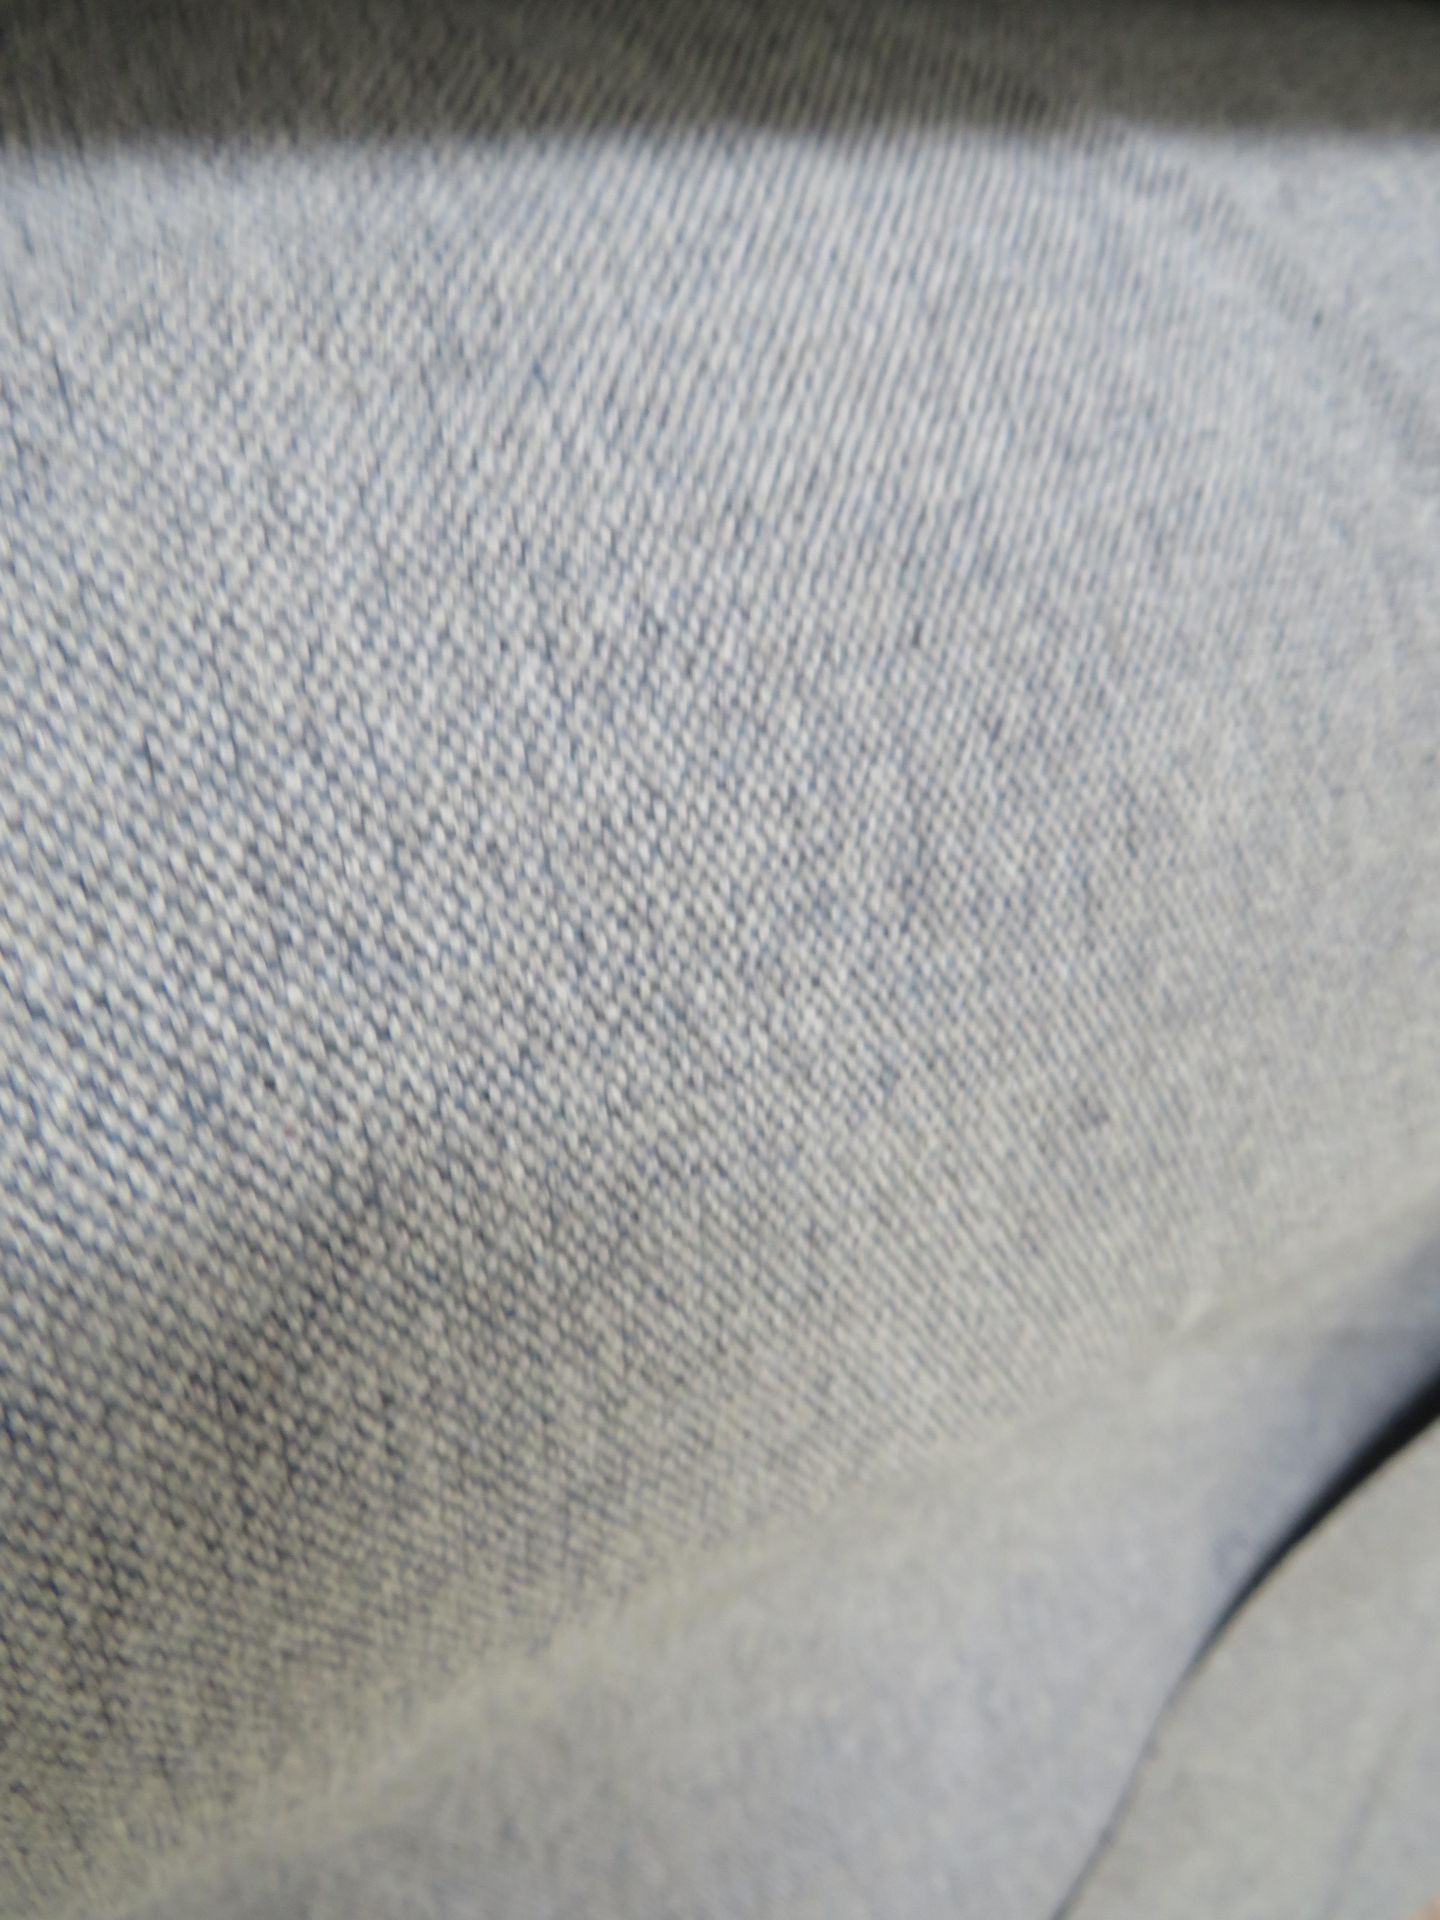 Roll of Mary Lamb slate grey denim style fabric, unknown length as sold in John Lewis - Image 2 of 2